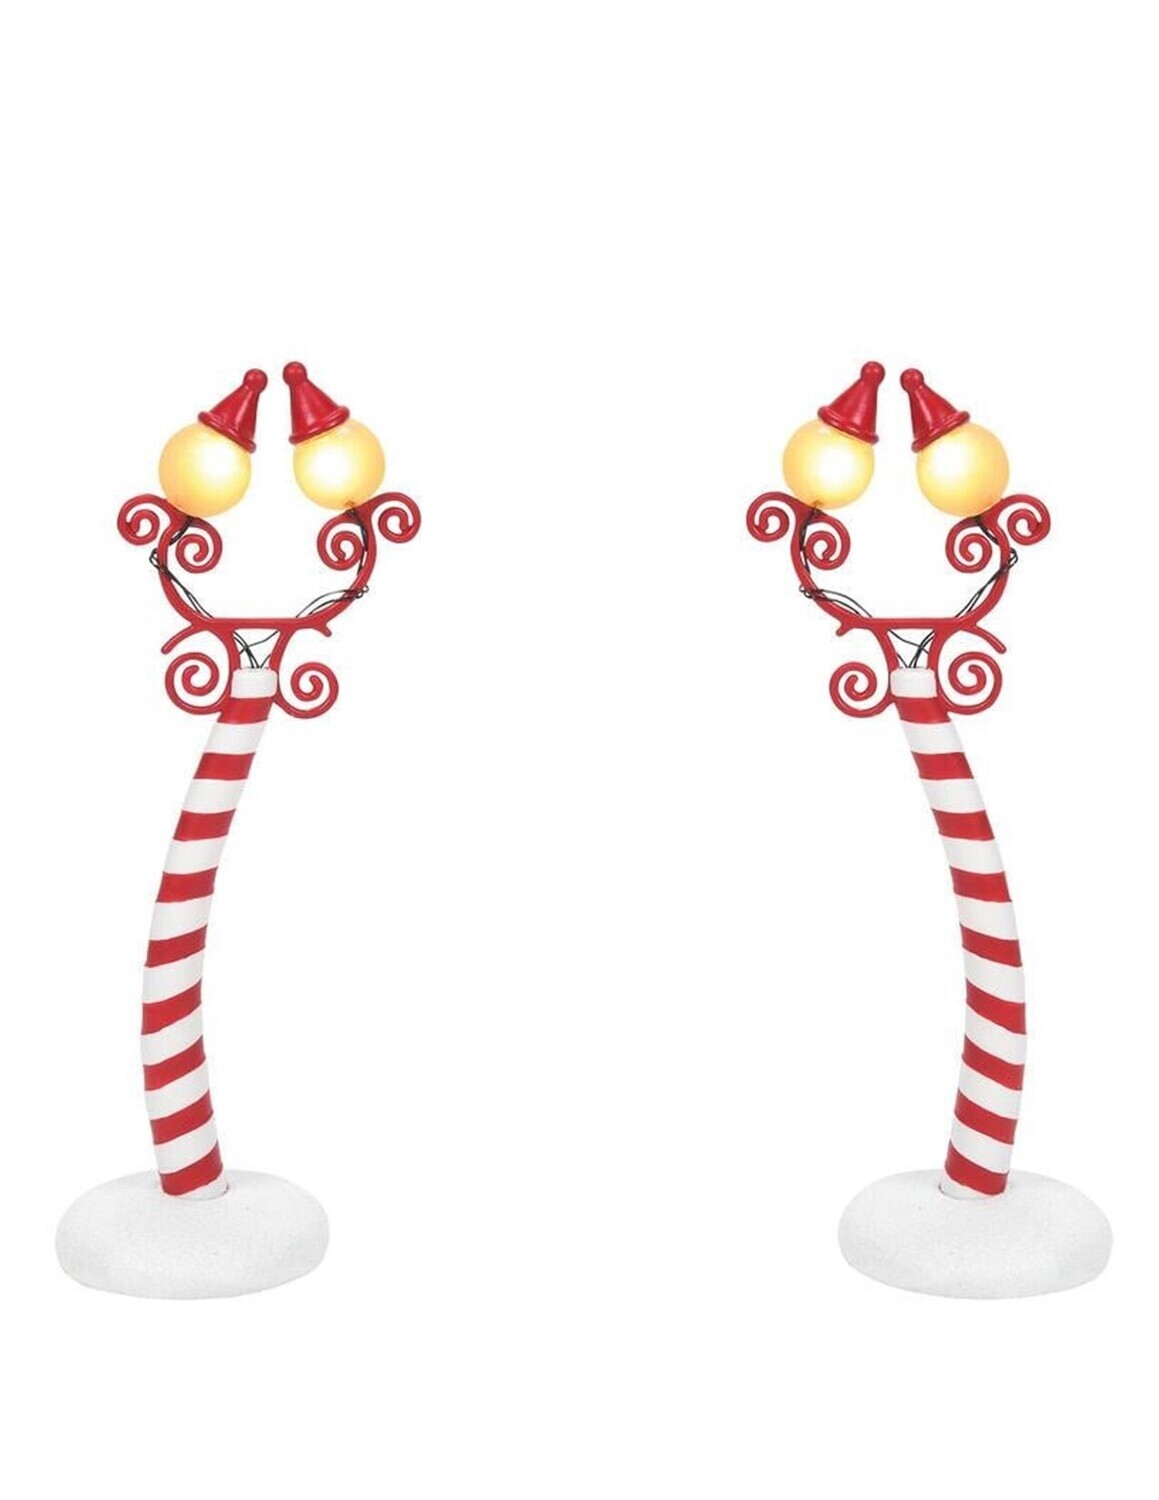 Department 56 "Christmas Town Street Lights, Set of 2" The Nightmare Before Christmas Series (6007743)